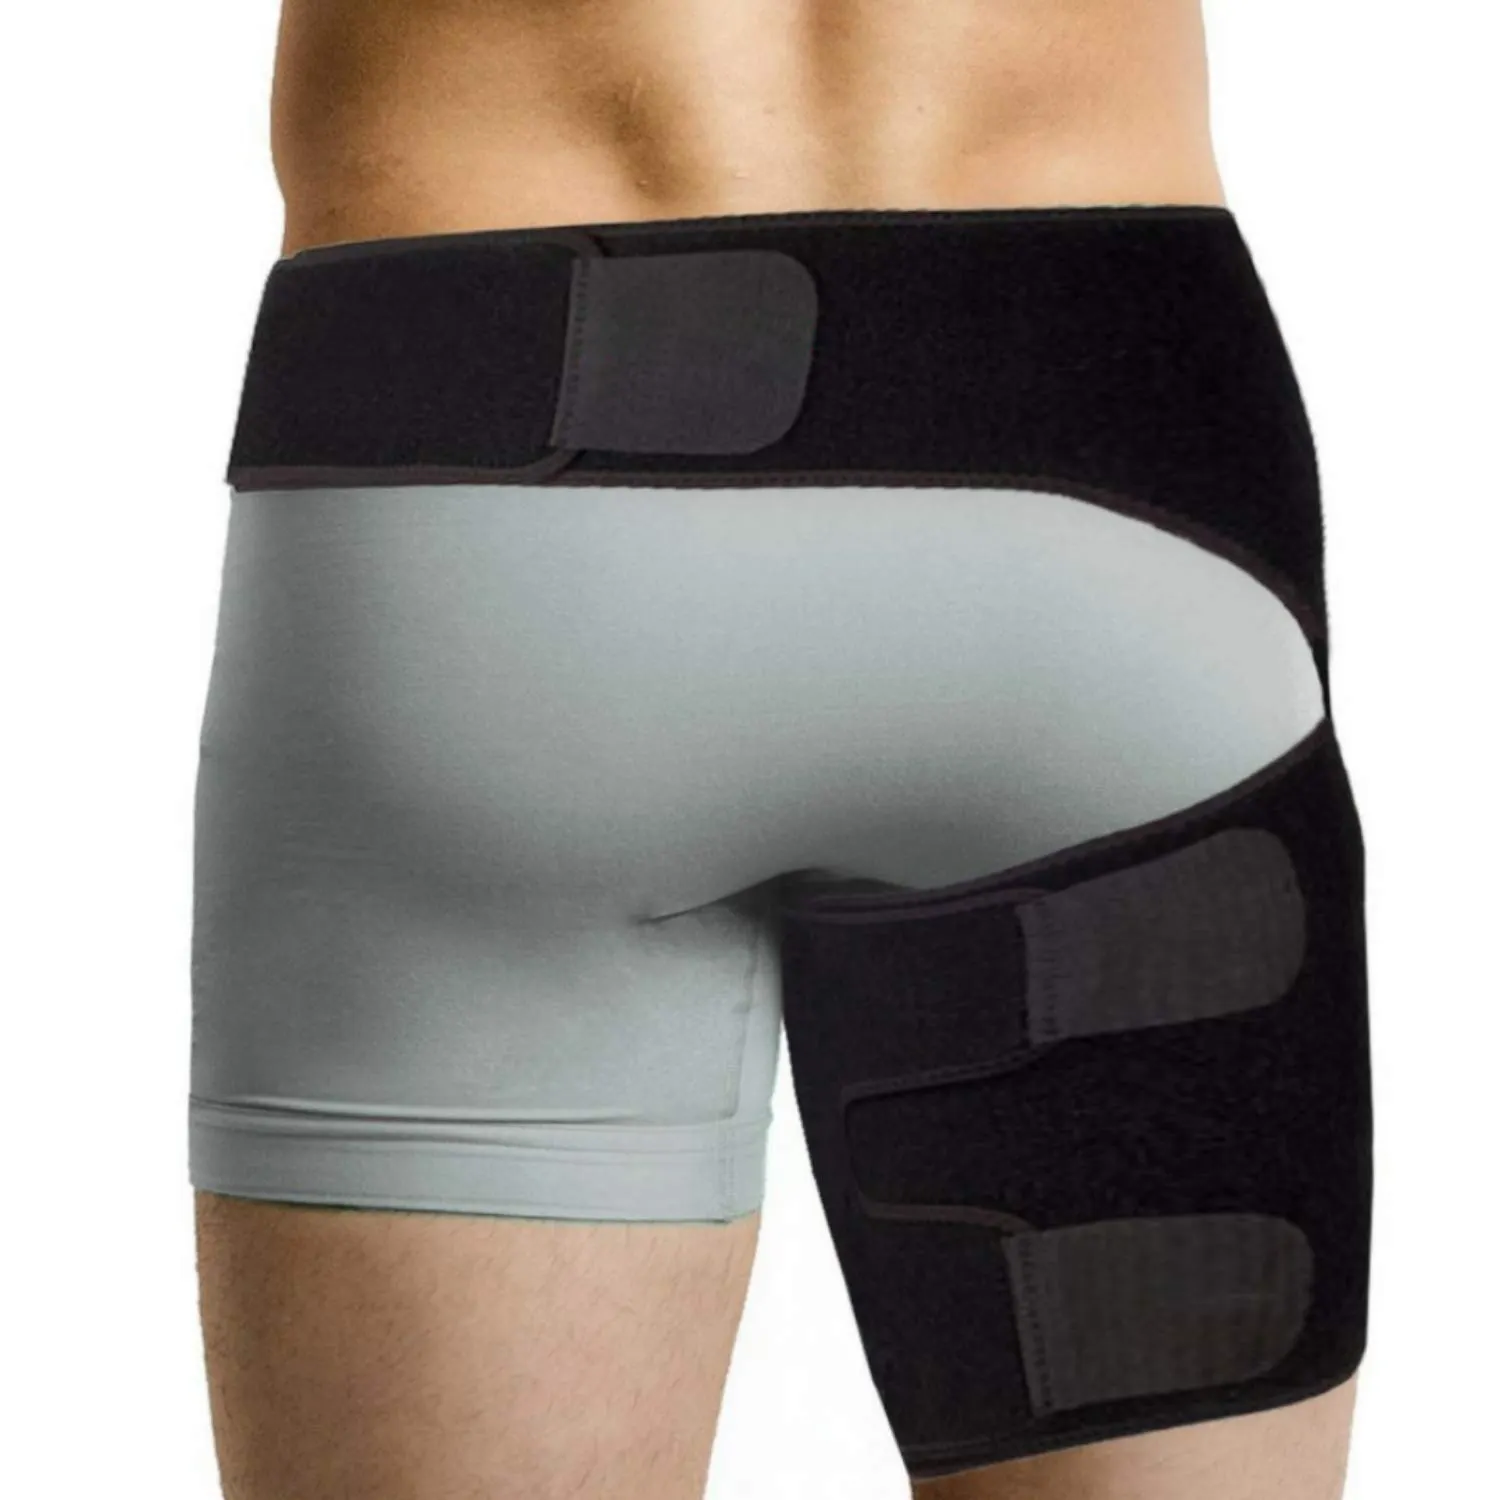 Adjustable Neoprene Brace Compression Groin Thigh Sleeve Hip Support